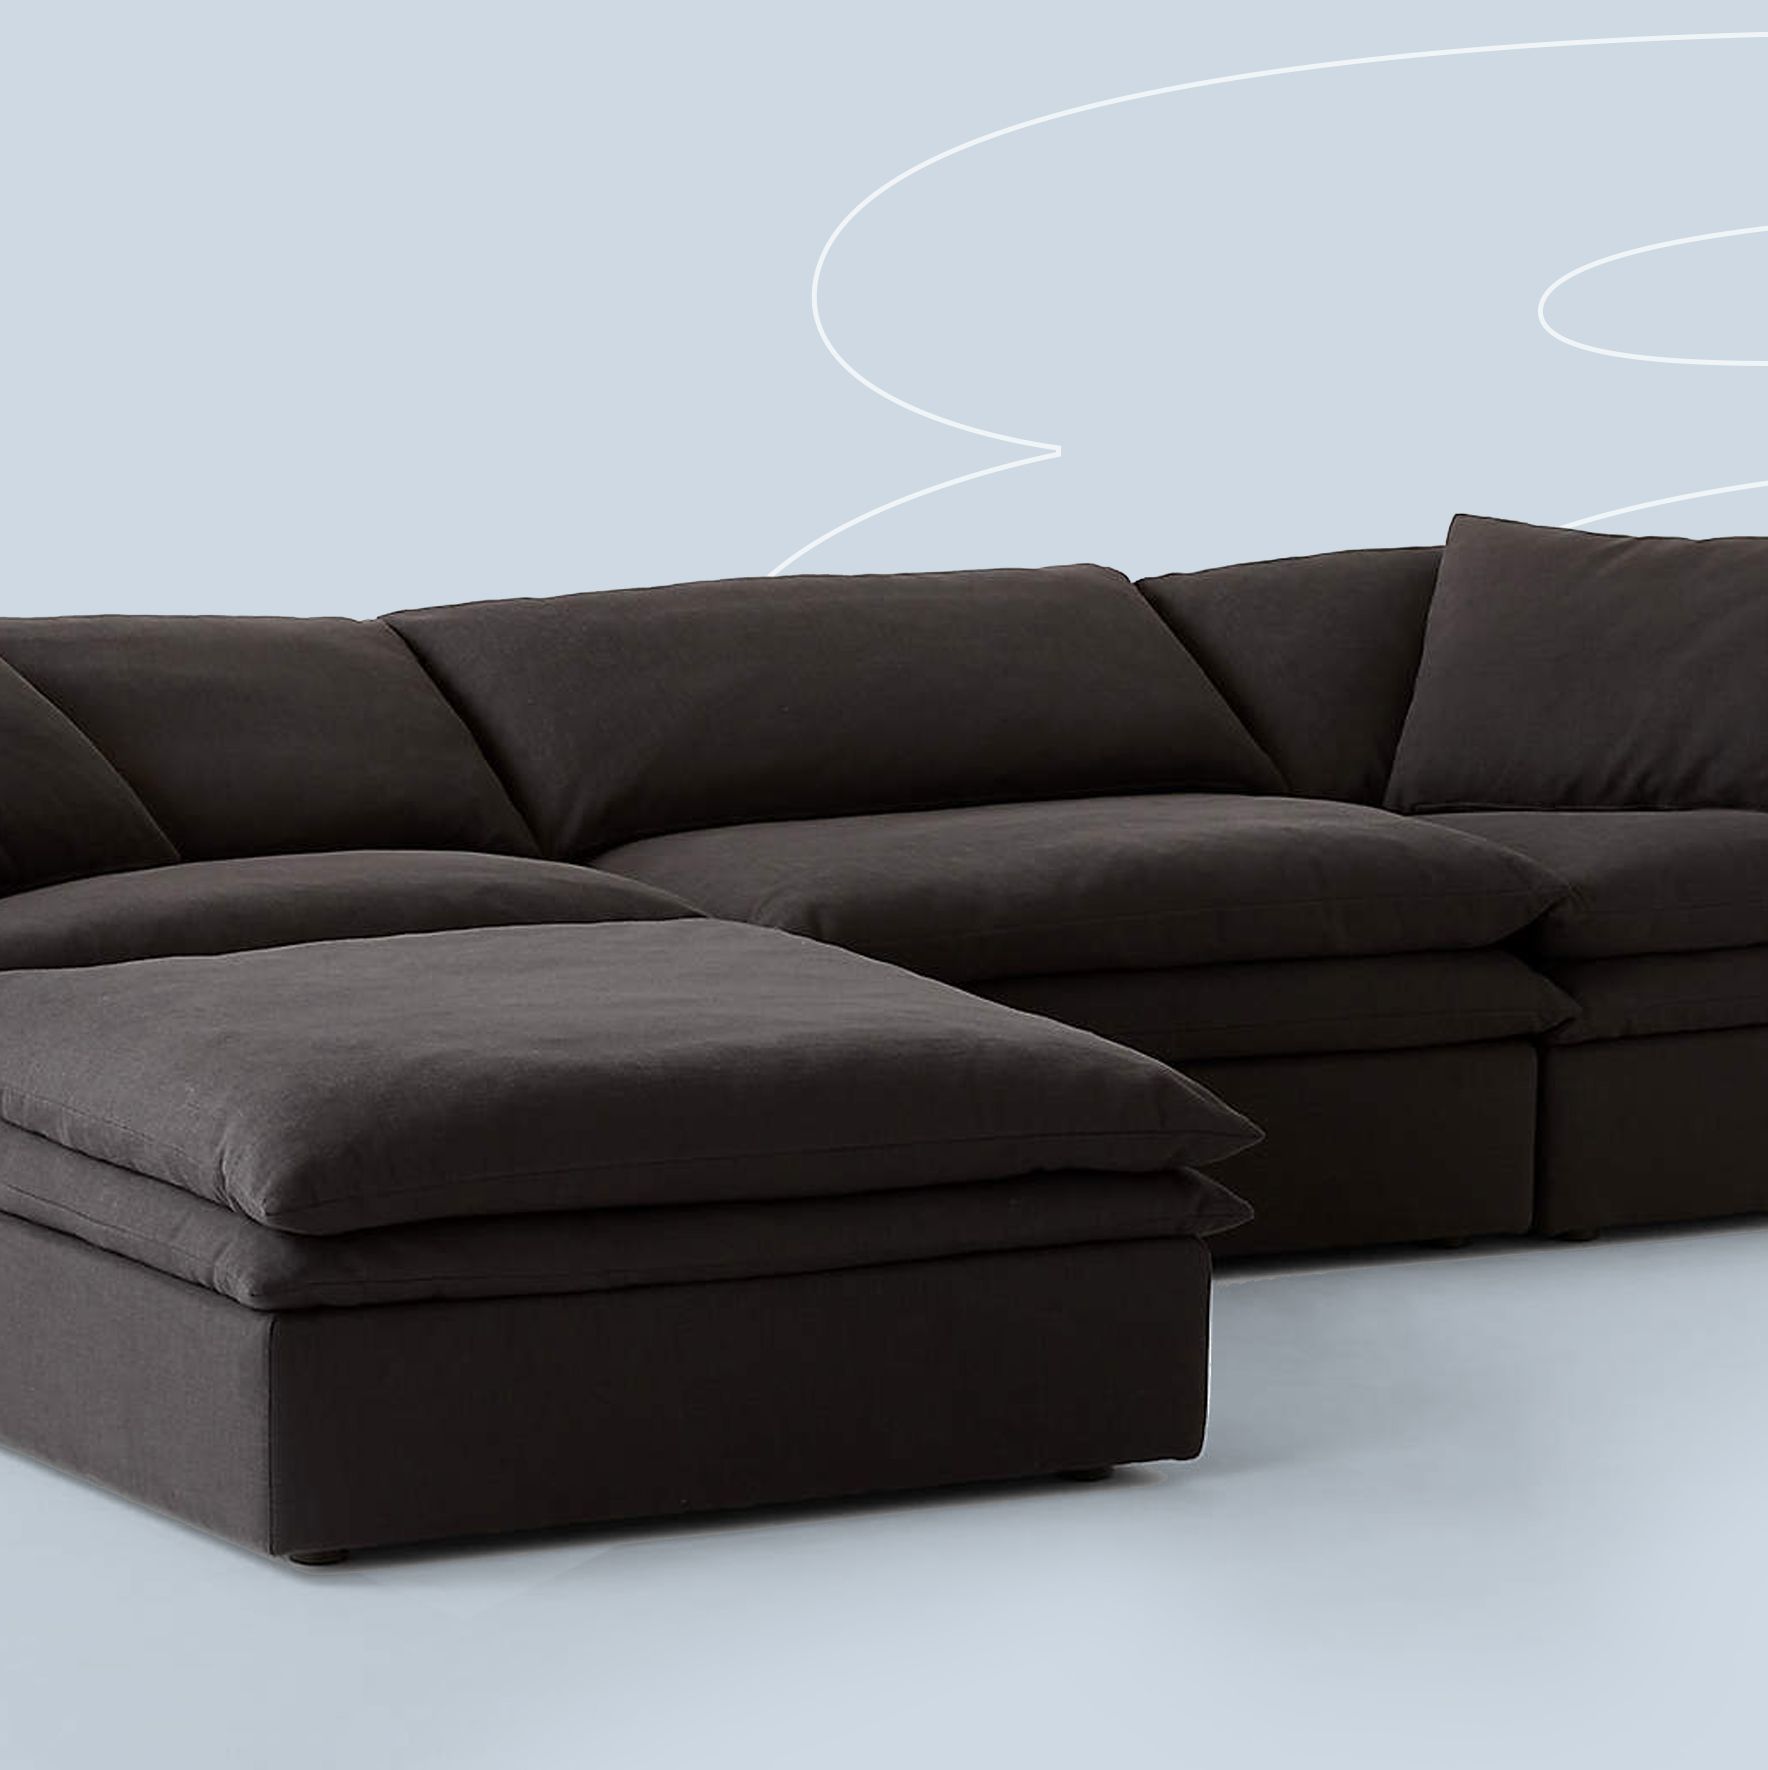 10 L-Shape Sofas That Prove Comfort Is King